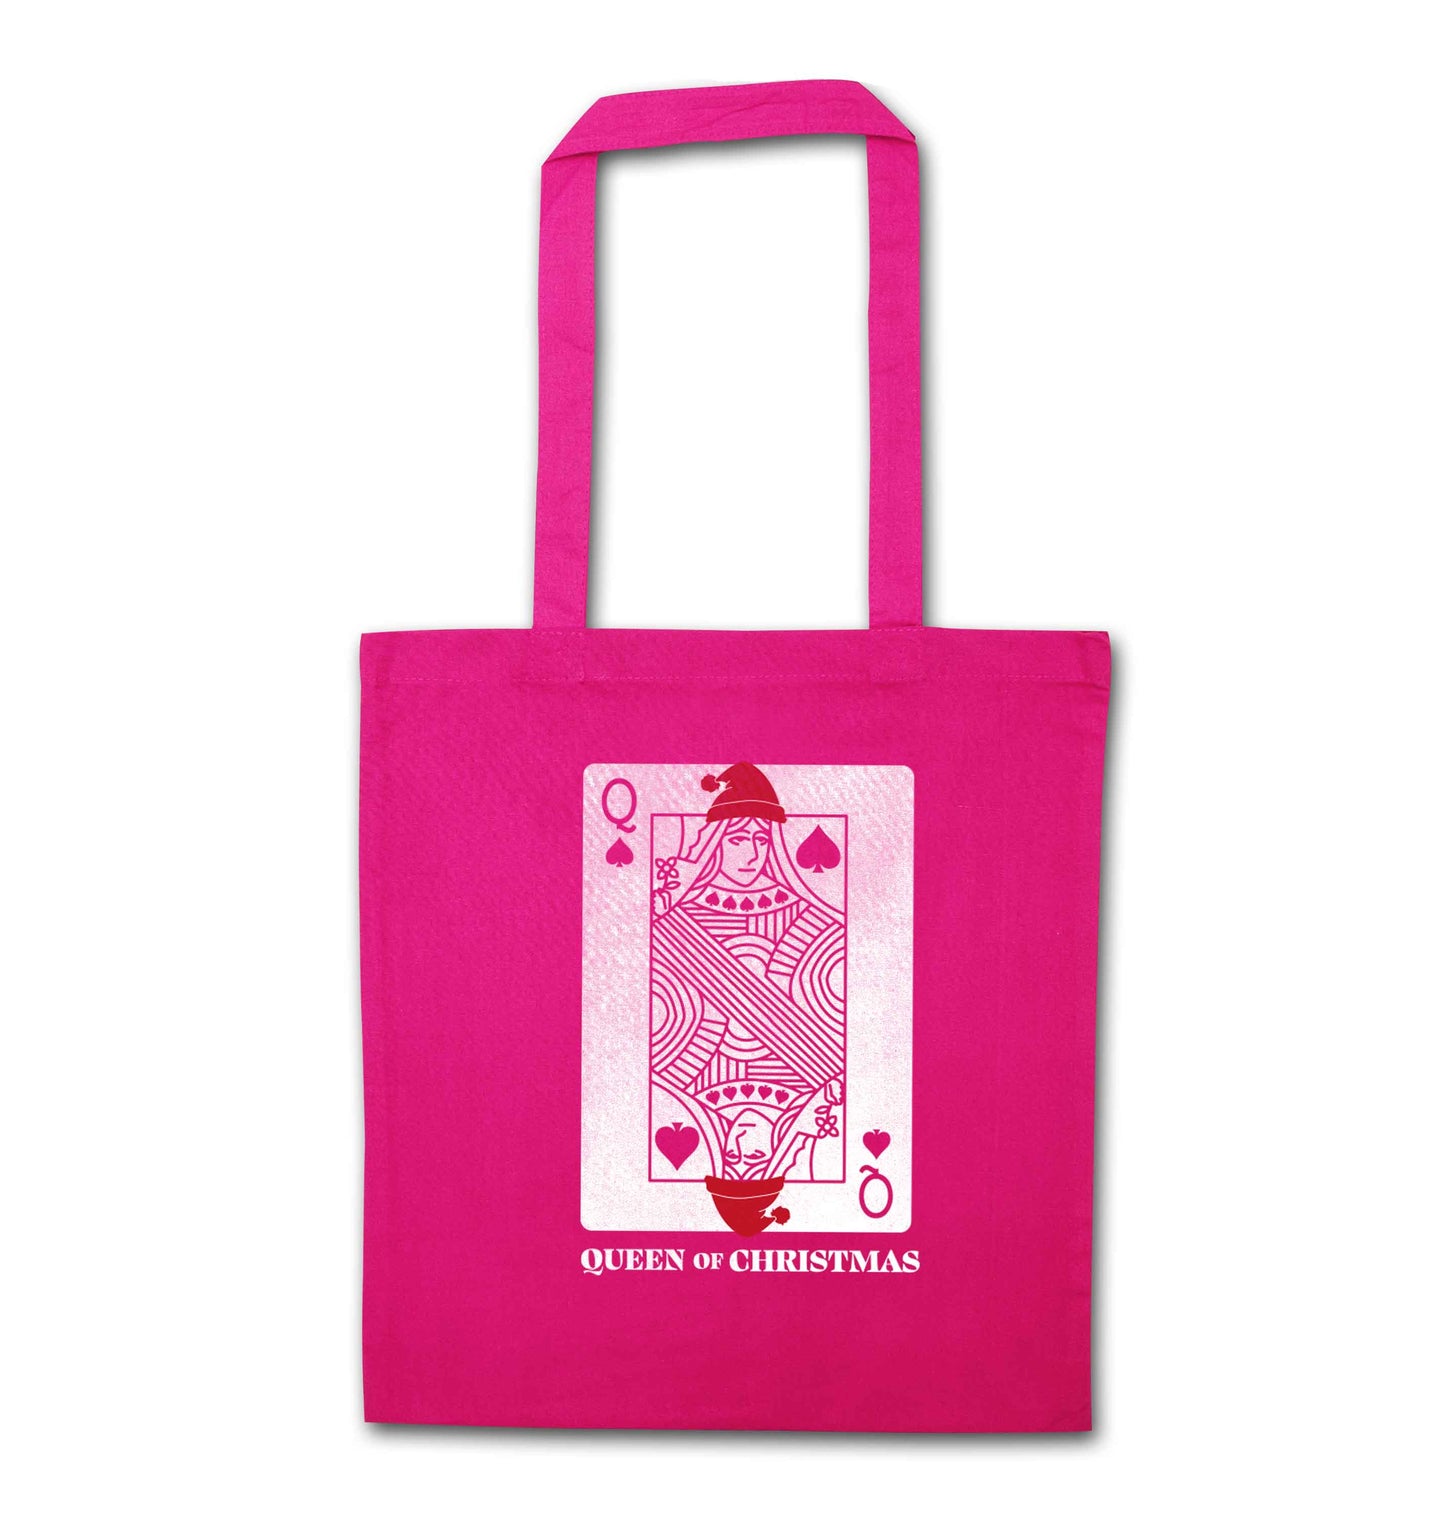 Queen of christmas pink tote bag